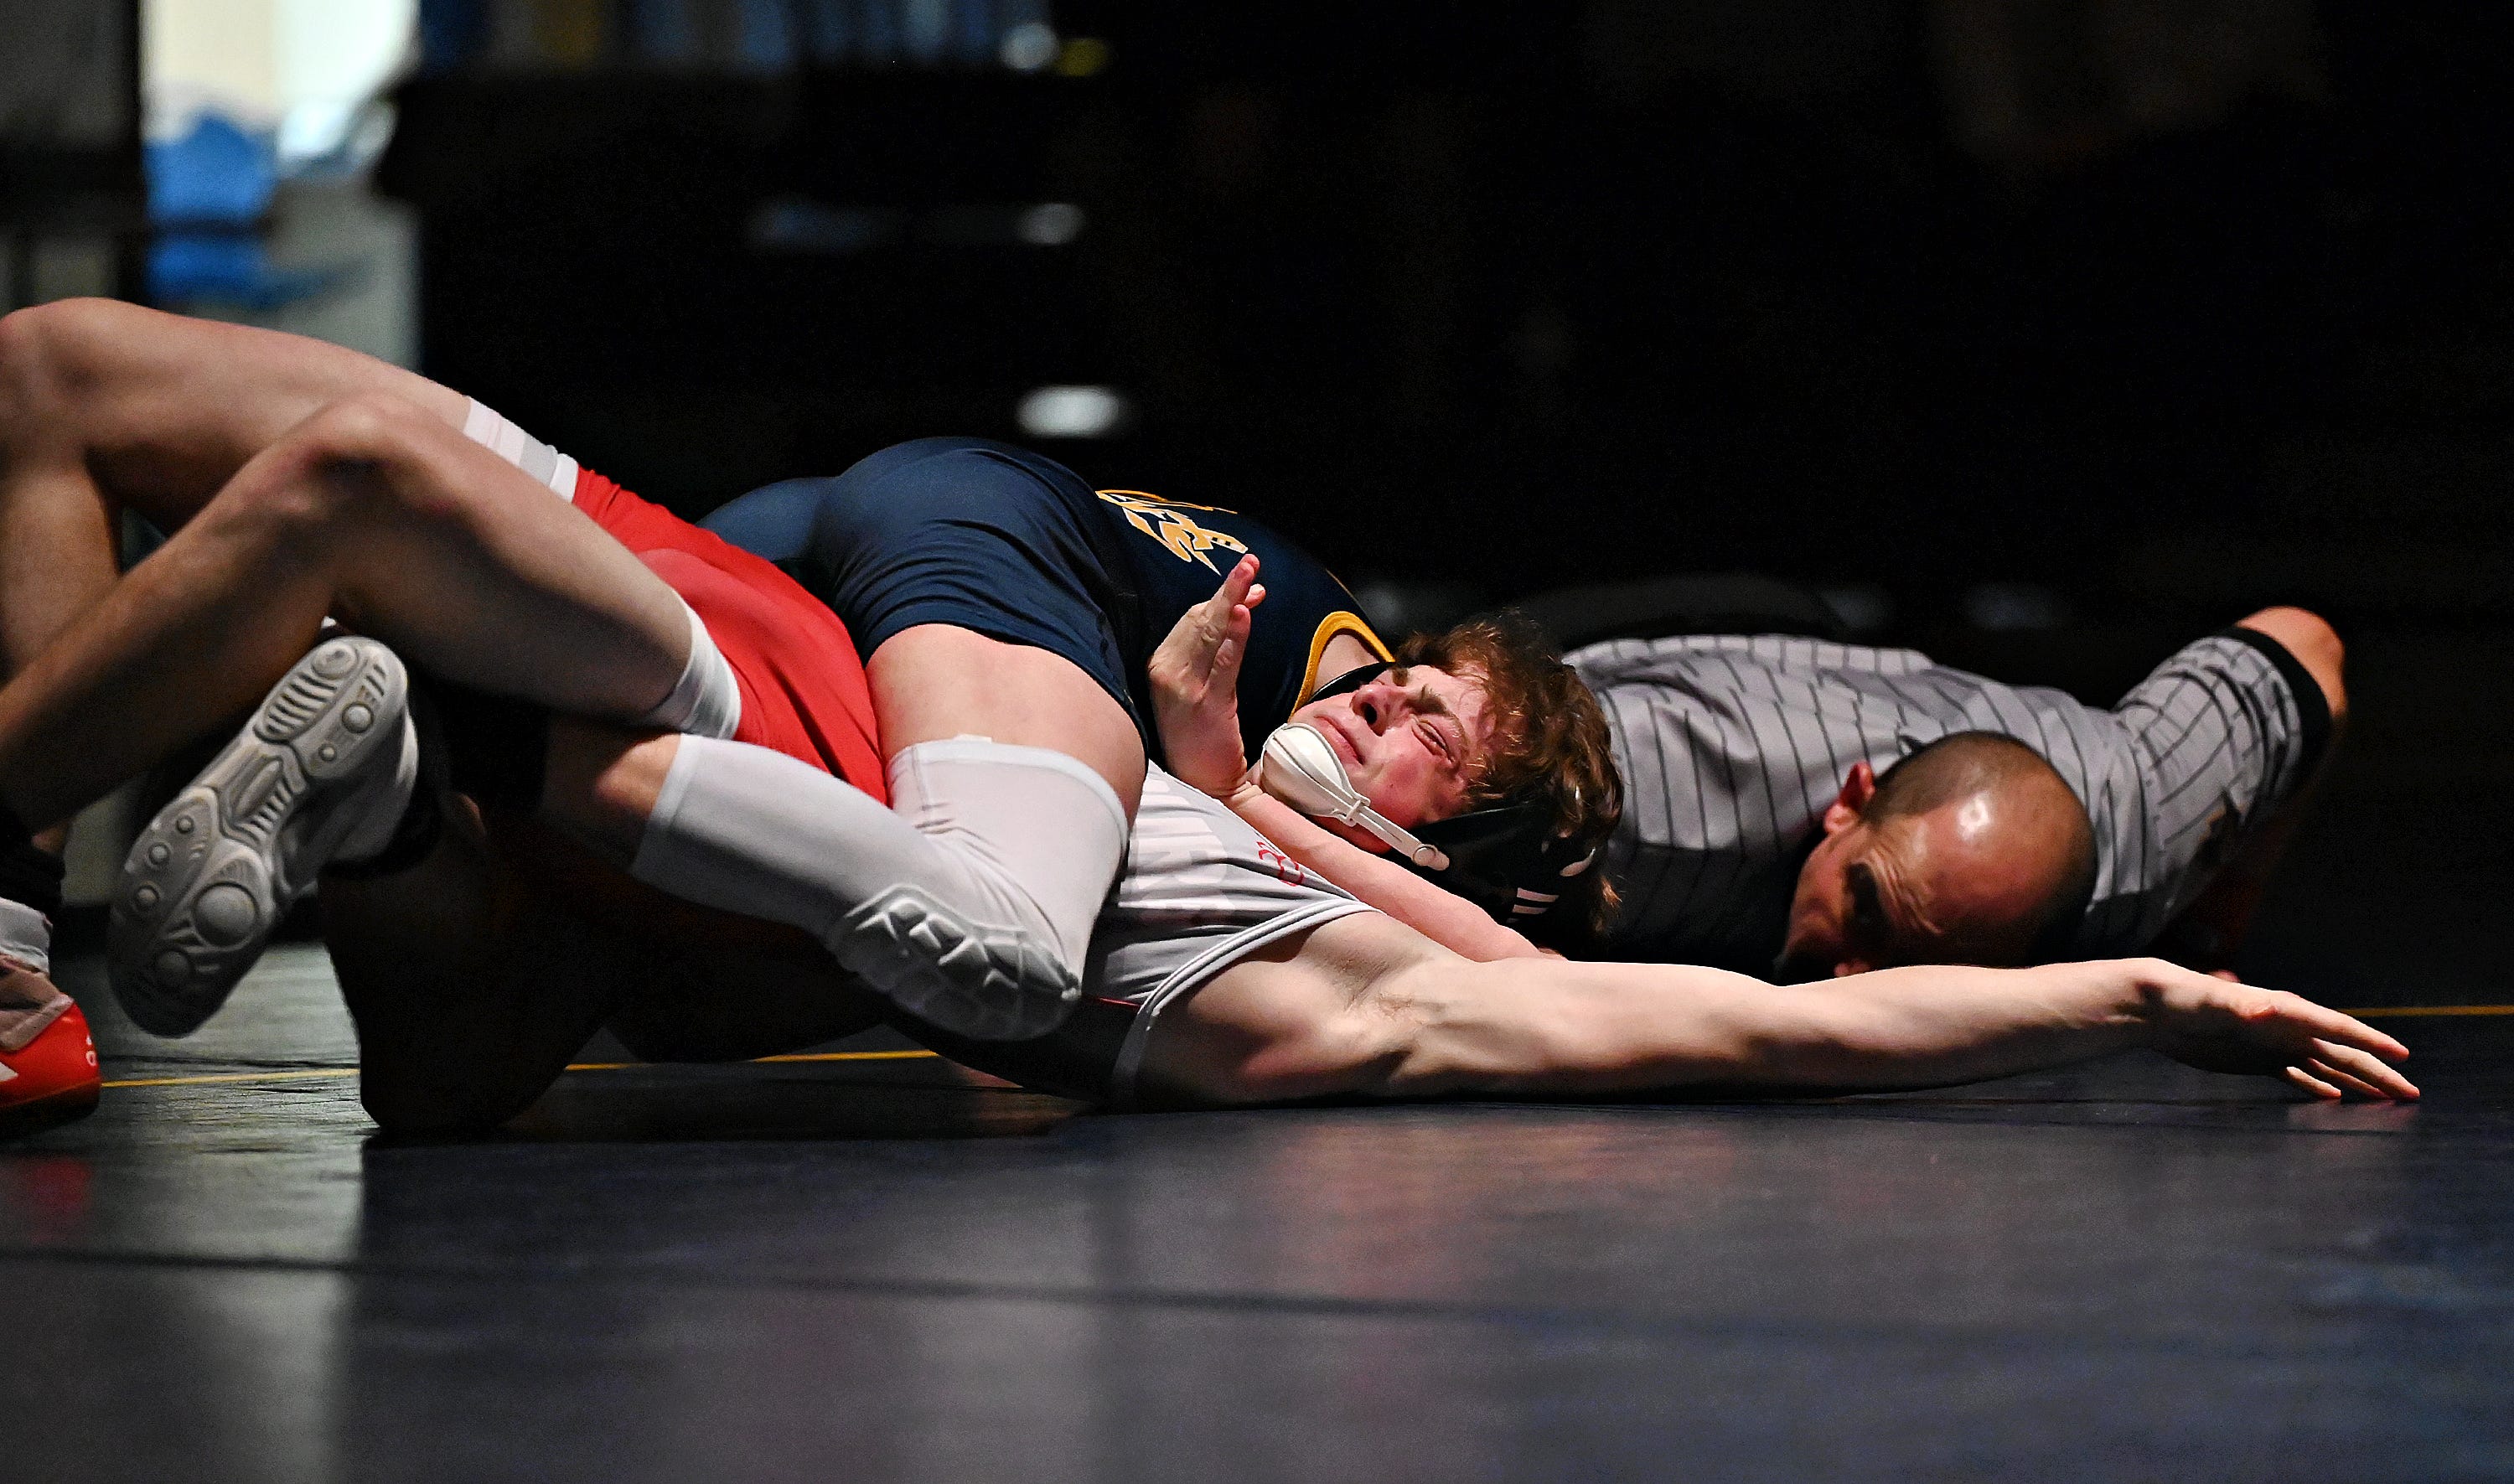 Eastern York’s Keagan Hubler, back, and Hamburg’s Logan Monroe compete in the 152-pound weight class during PIAA District 3, Class 2-A first round wrestling action at Eastern York High School in Lower Windsor Township, Monday, Jan. 30, 2023. Hubler would win the match with a pin at 1:24 and Eastern York would win the meet 50-22. Dawn J. Sagert photo